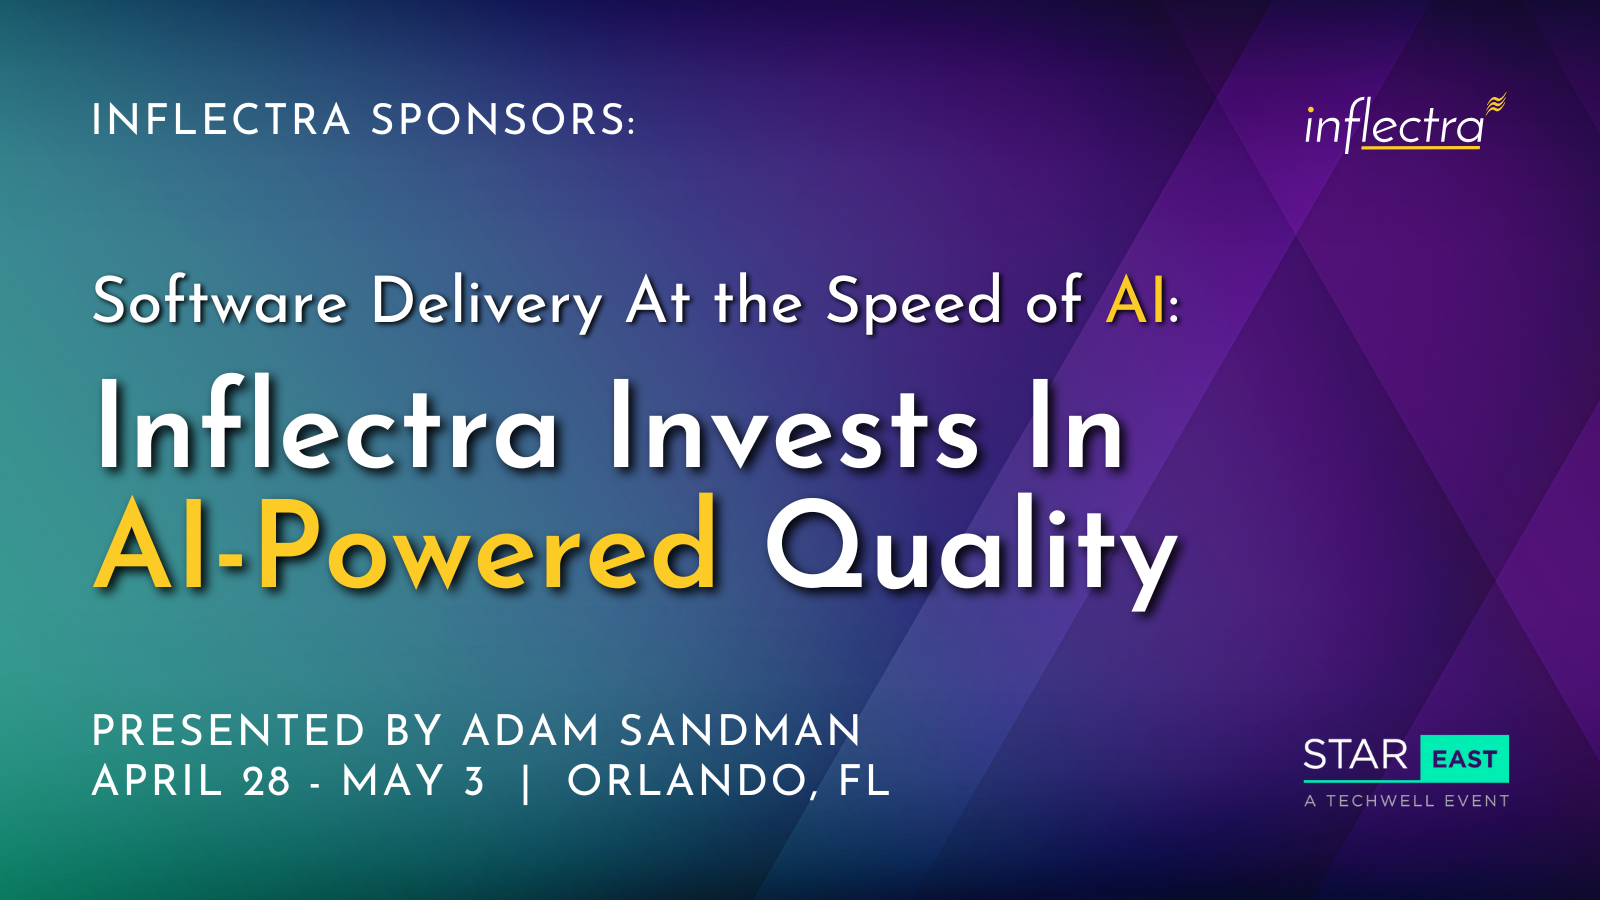 itp-software-delivery-at-the-speed-of-ai-inflectra-invests-in-ai-powered-quality-presented-by-ceo-adam-sandman-at-stareast-conference-in-orlando-florida-image